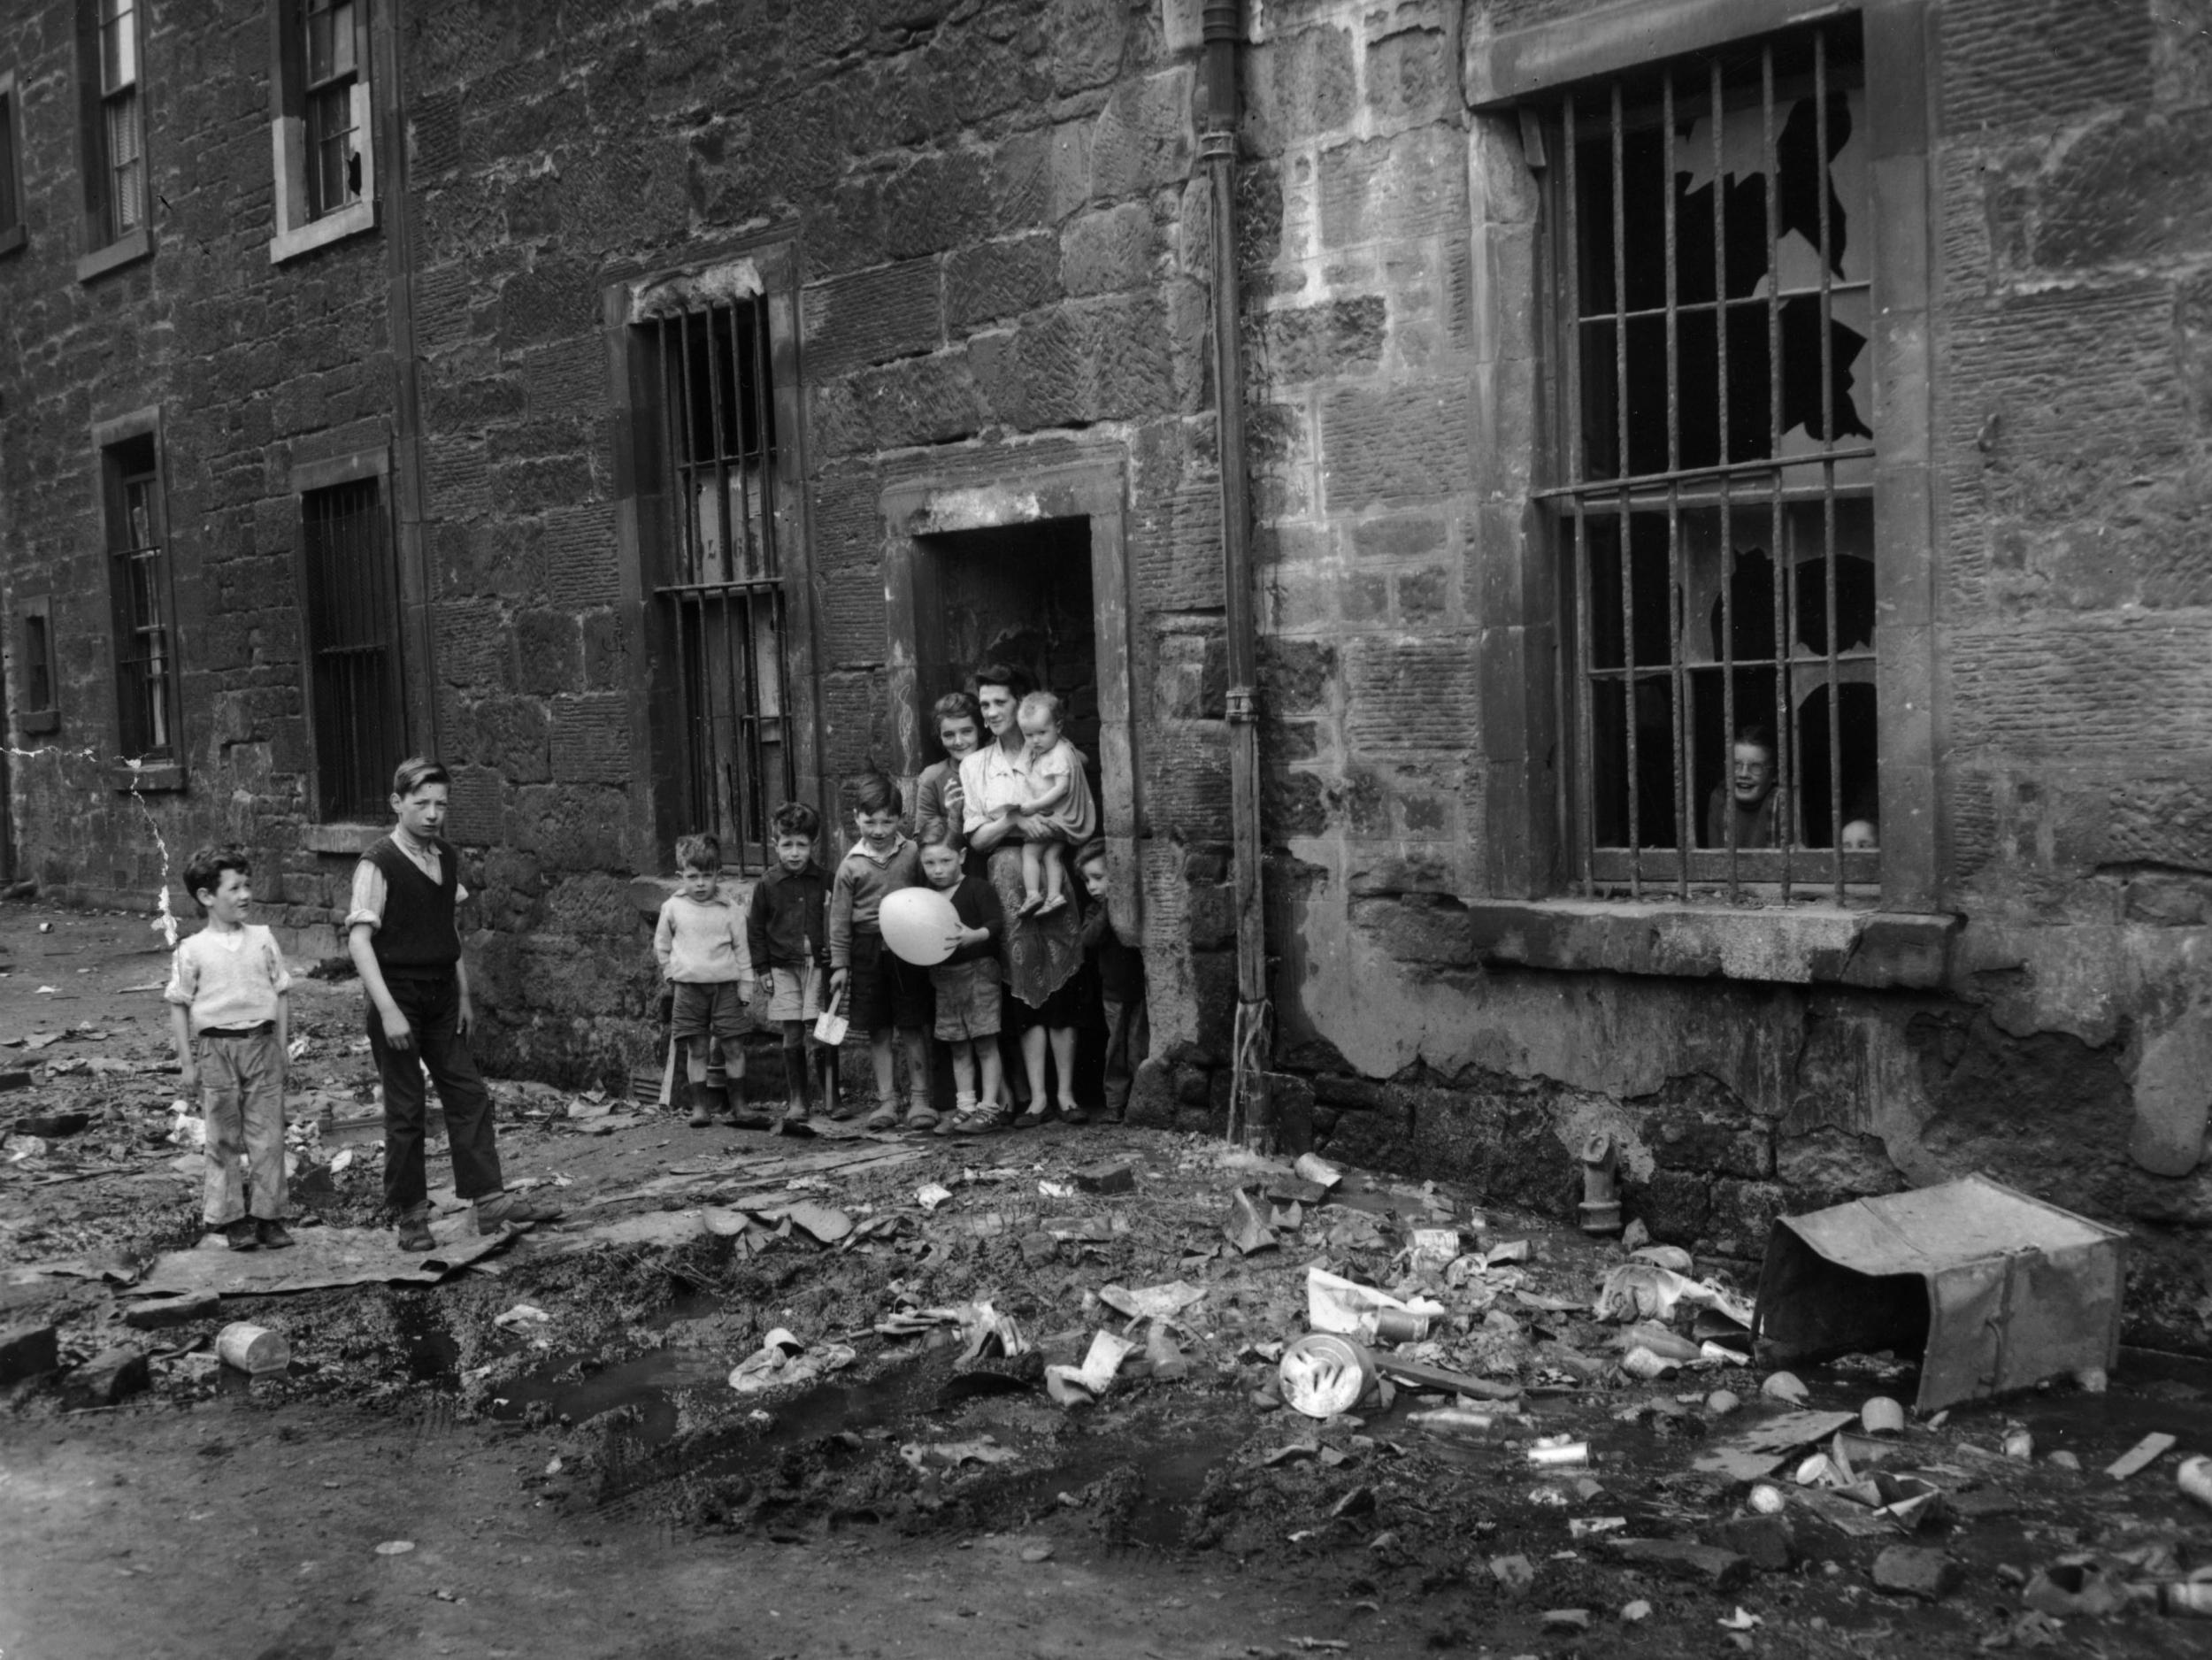 Even in the 1950s the squalor of places such as the Gorbals, in Glasgow, was not conducive to a long life expectancy